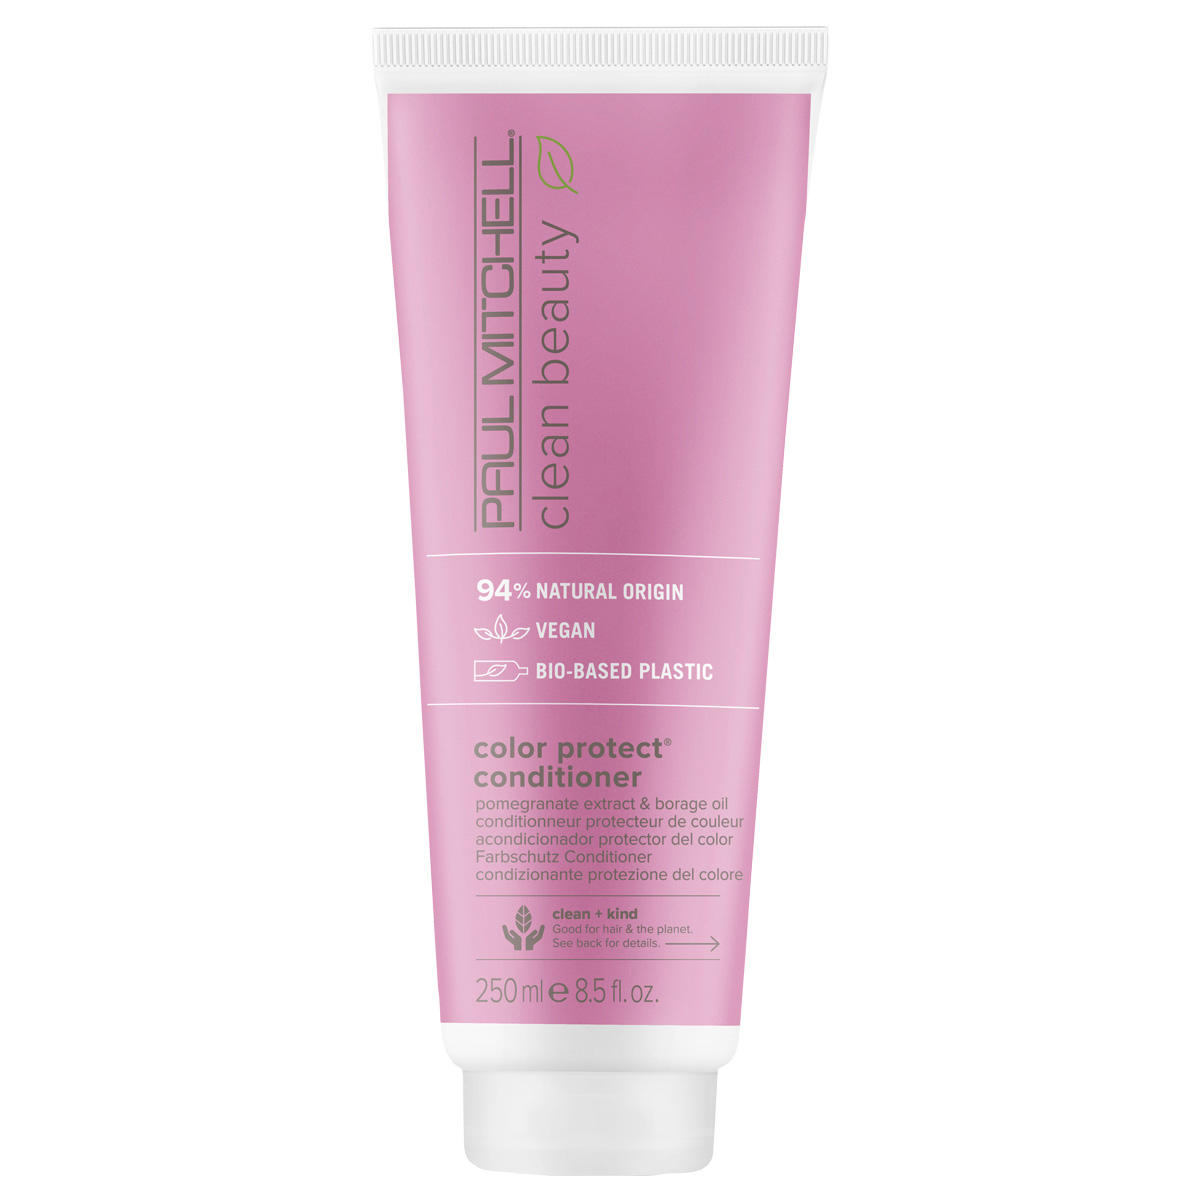 Paul Mitchell Clean Beauty Color Protect Conditioner  - 1